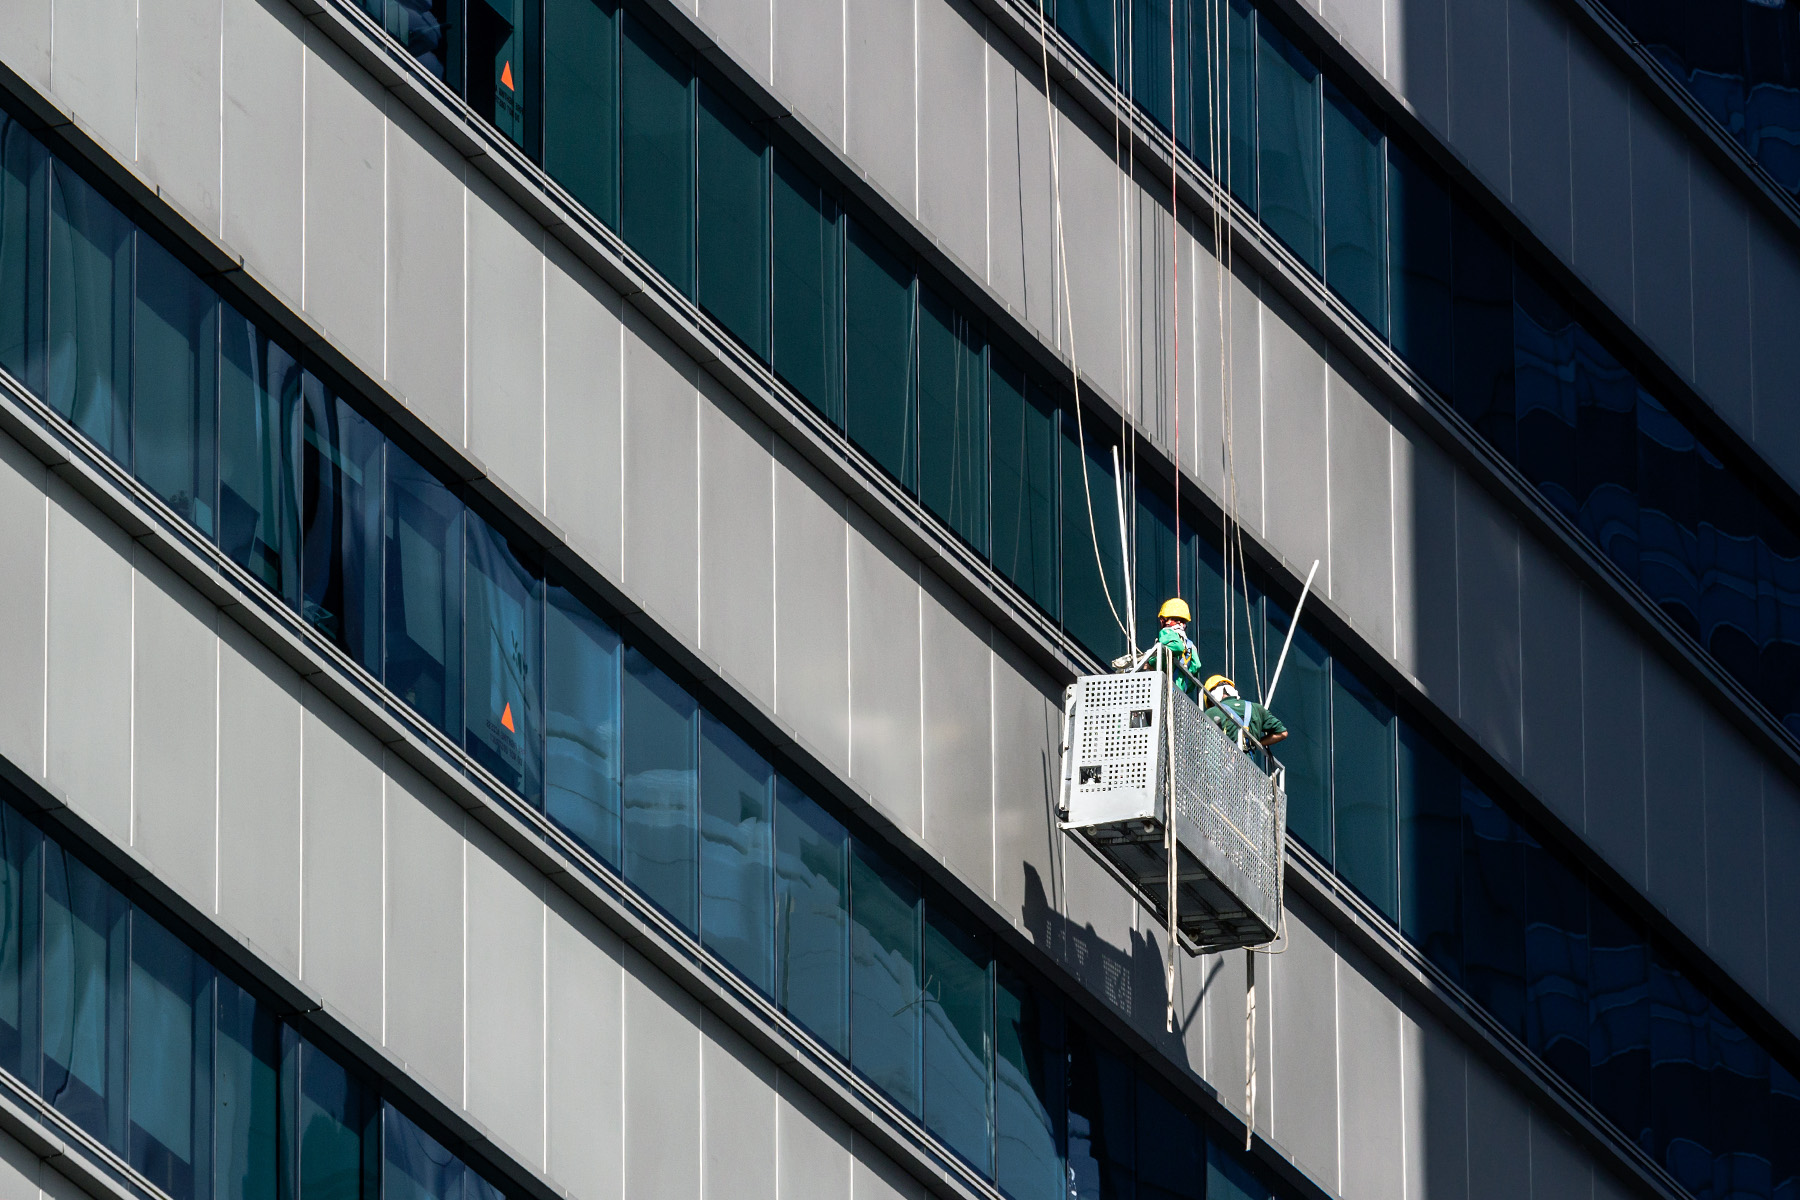 Two cleaners with hardhats and safety gear cleaning the windows of a skyscraper in Singapore.